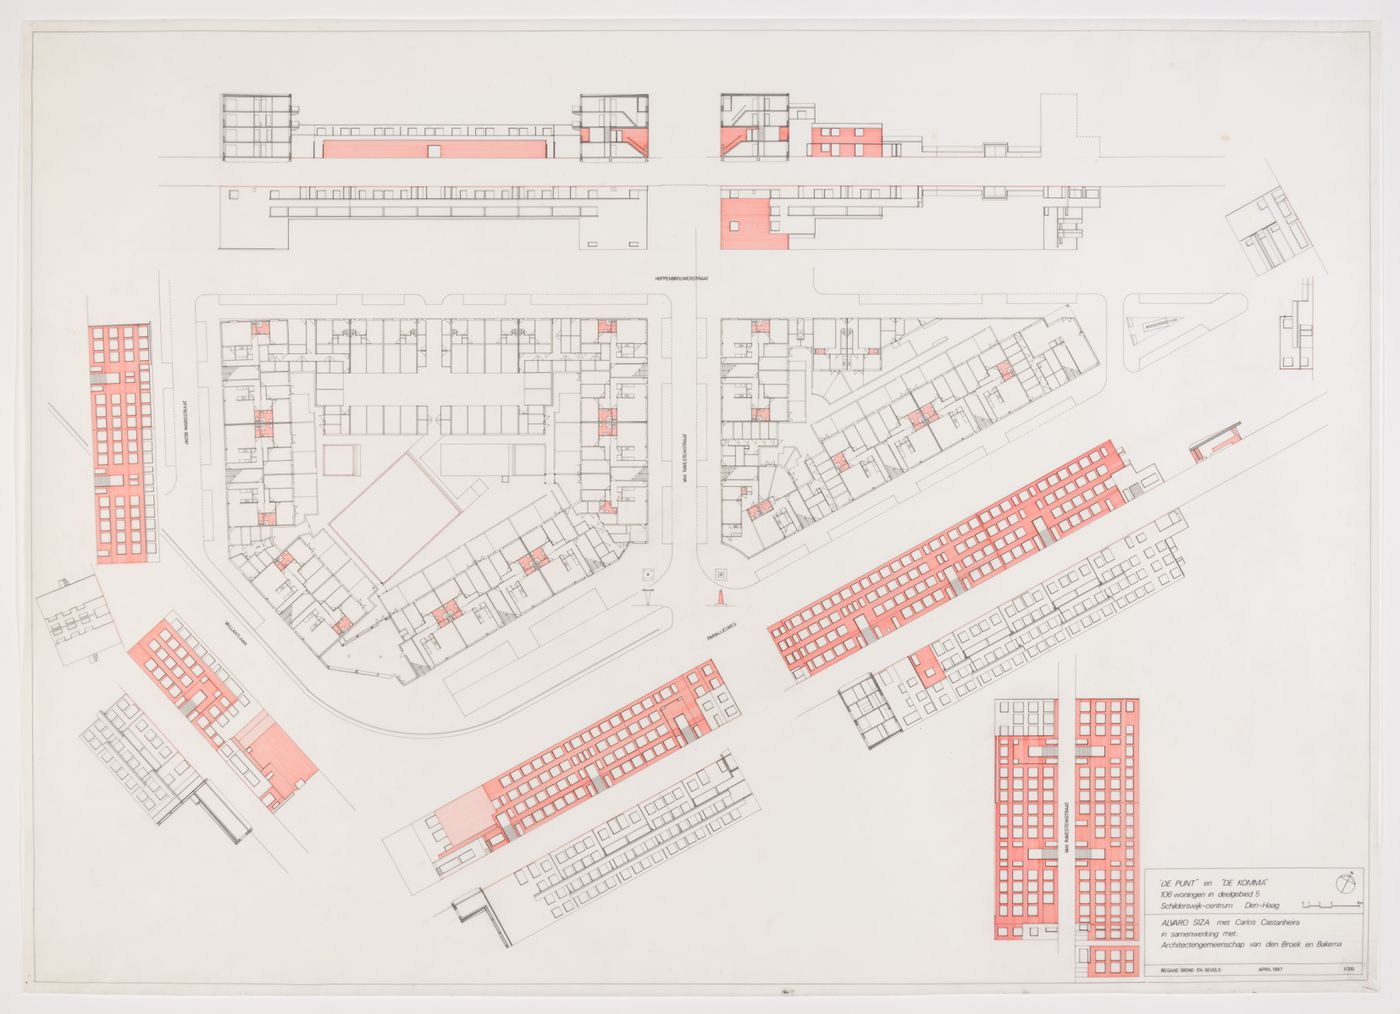 Plans, elevations and sections, Punt en Komma, The Hague